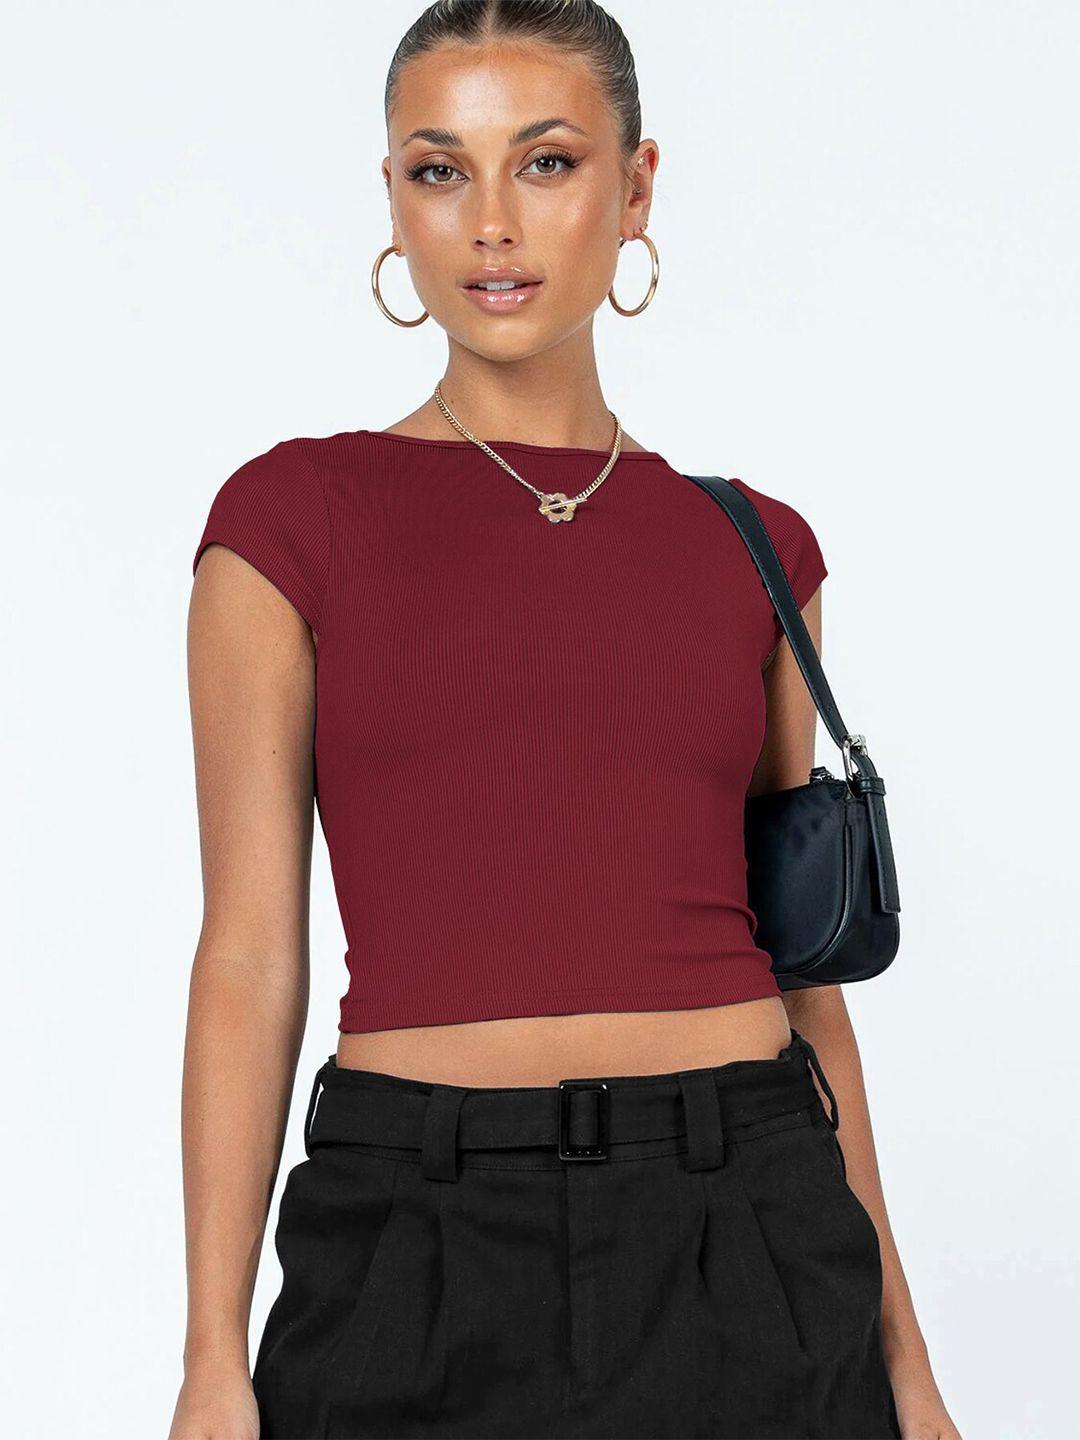 stylecast red fitted styled back crop top